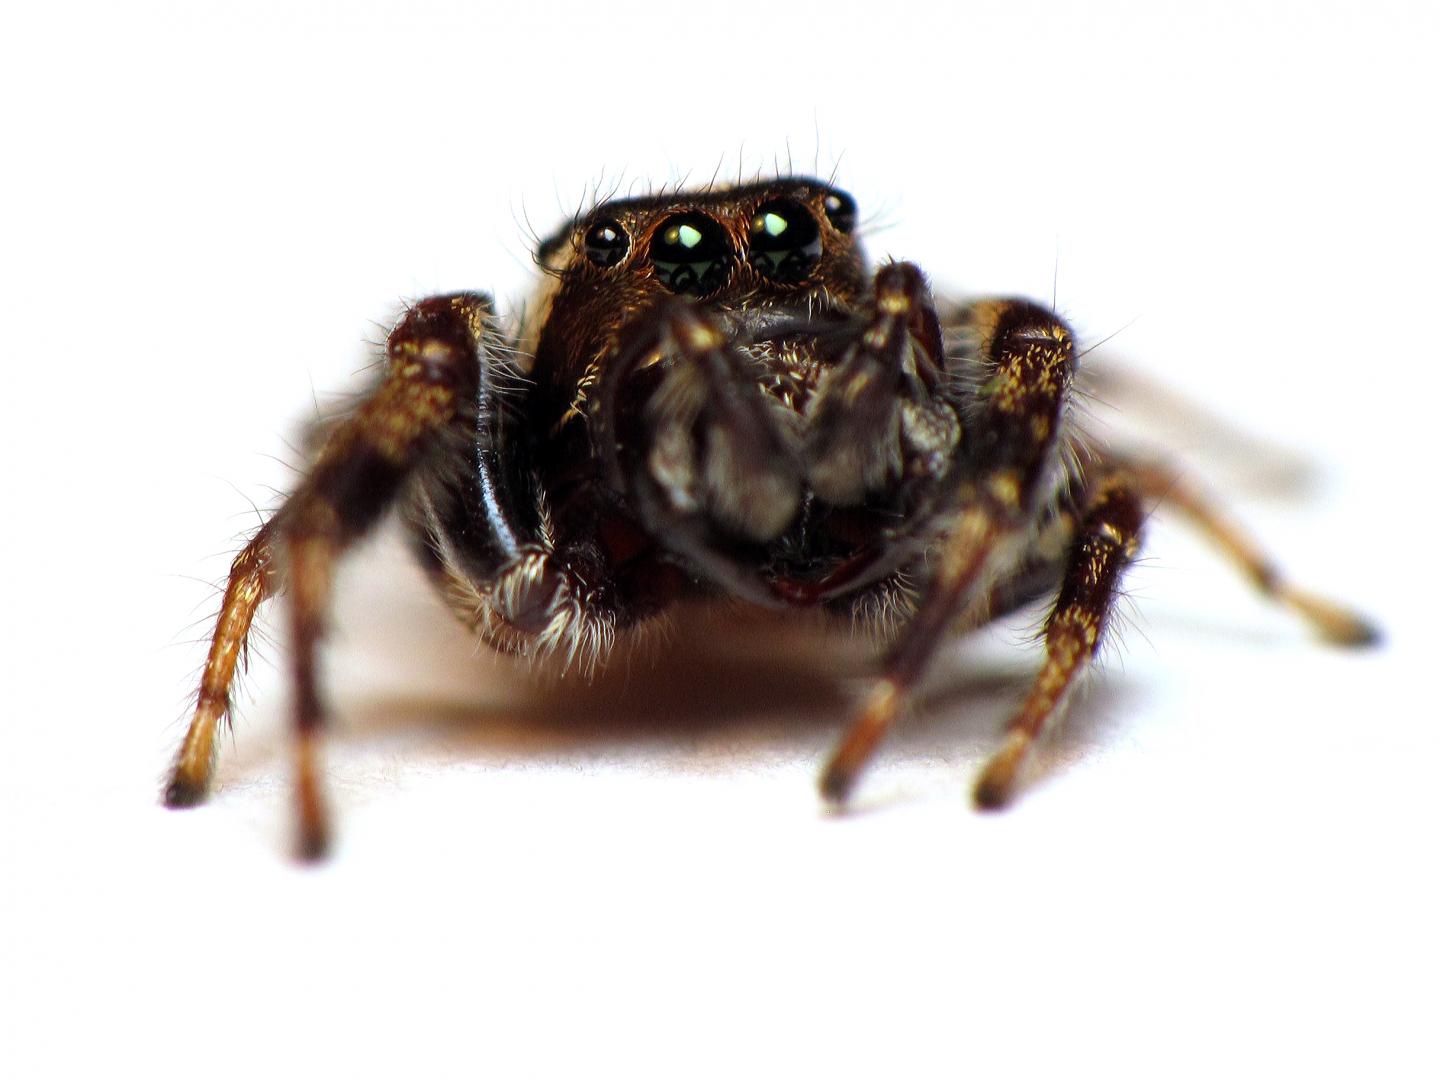 Male Copper Jumping Spider